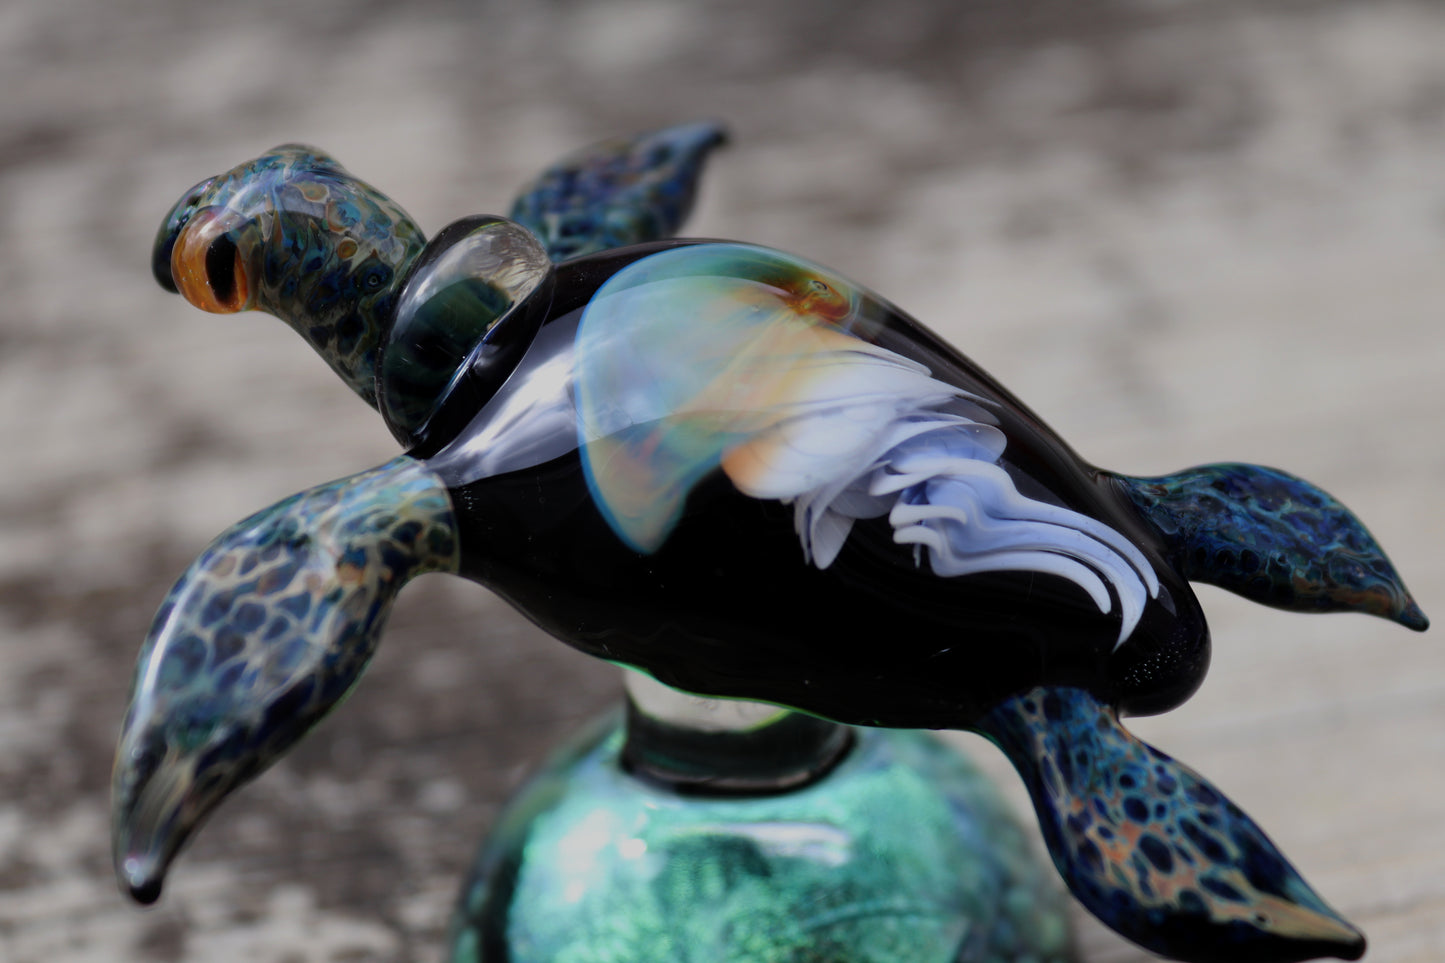 Unique Sea Turtle Sculpture with Opal Colored Jellyfish Inside.